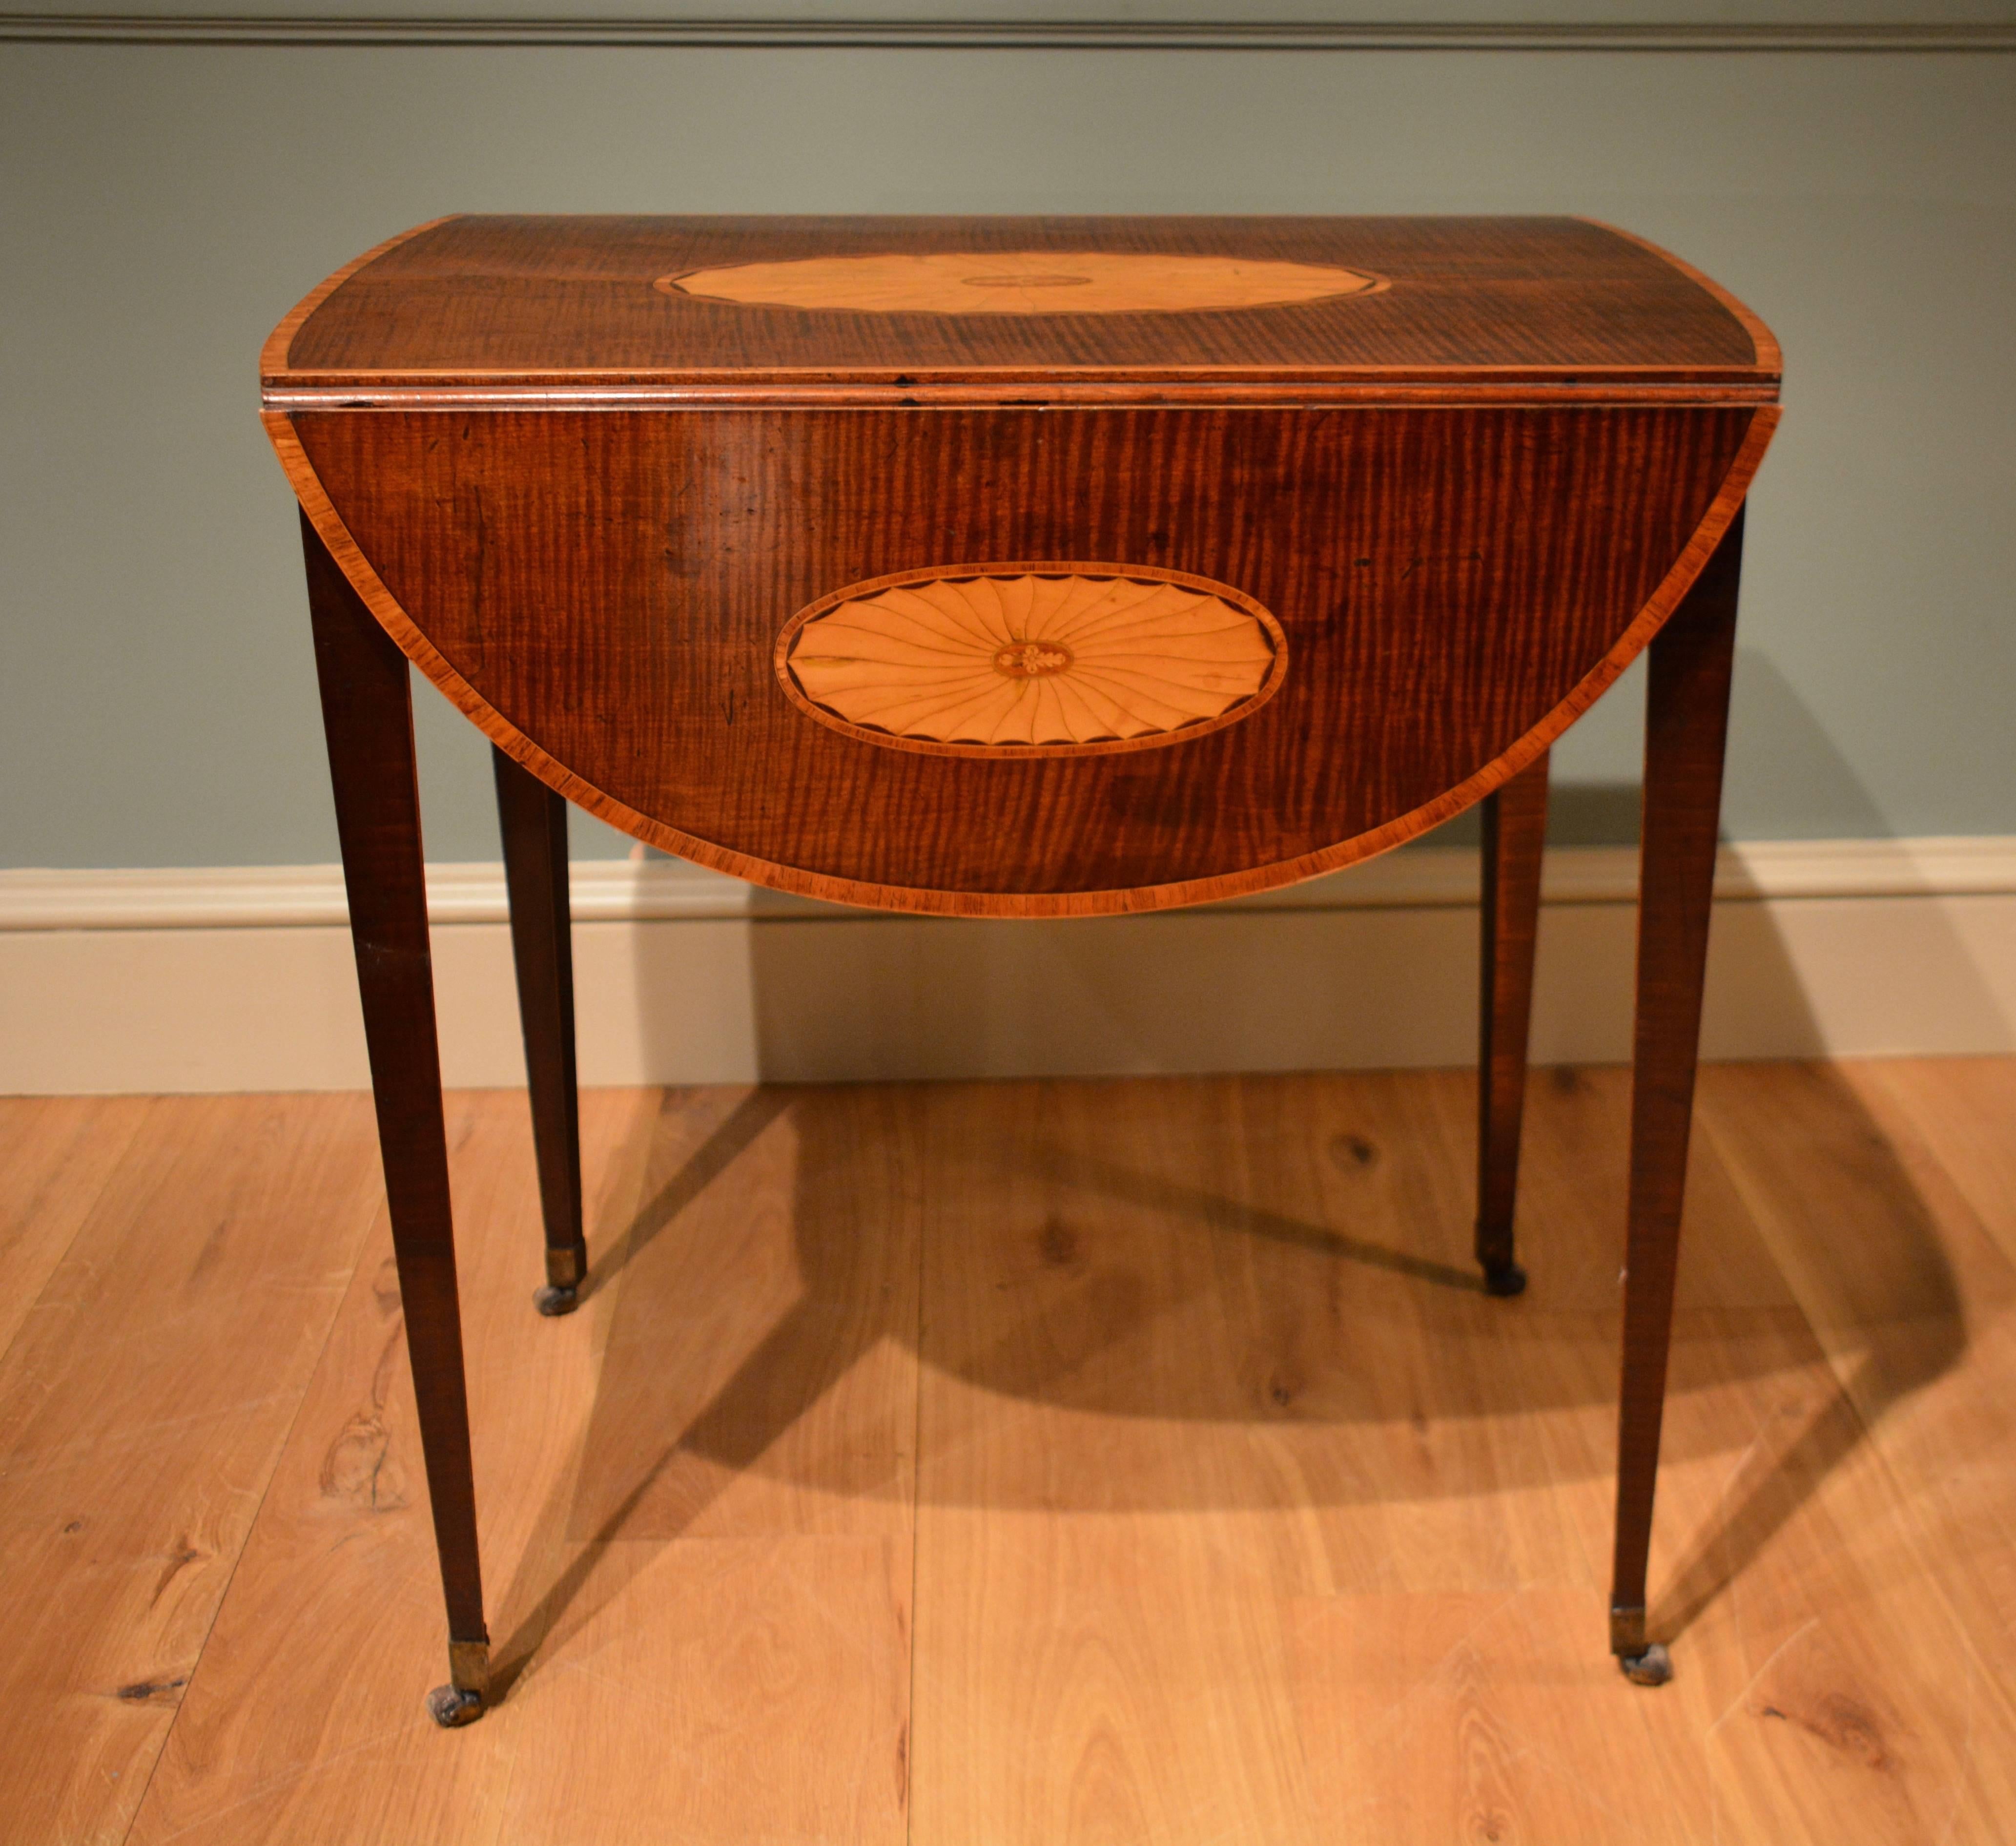 Satinwood A Late 18th Century Veneered And Inlaid Pembroke Table. Circa 1790.